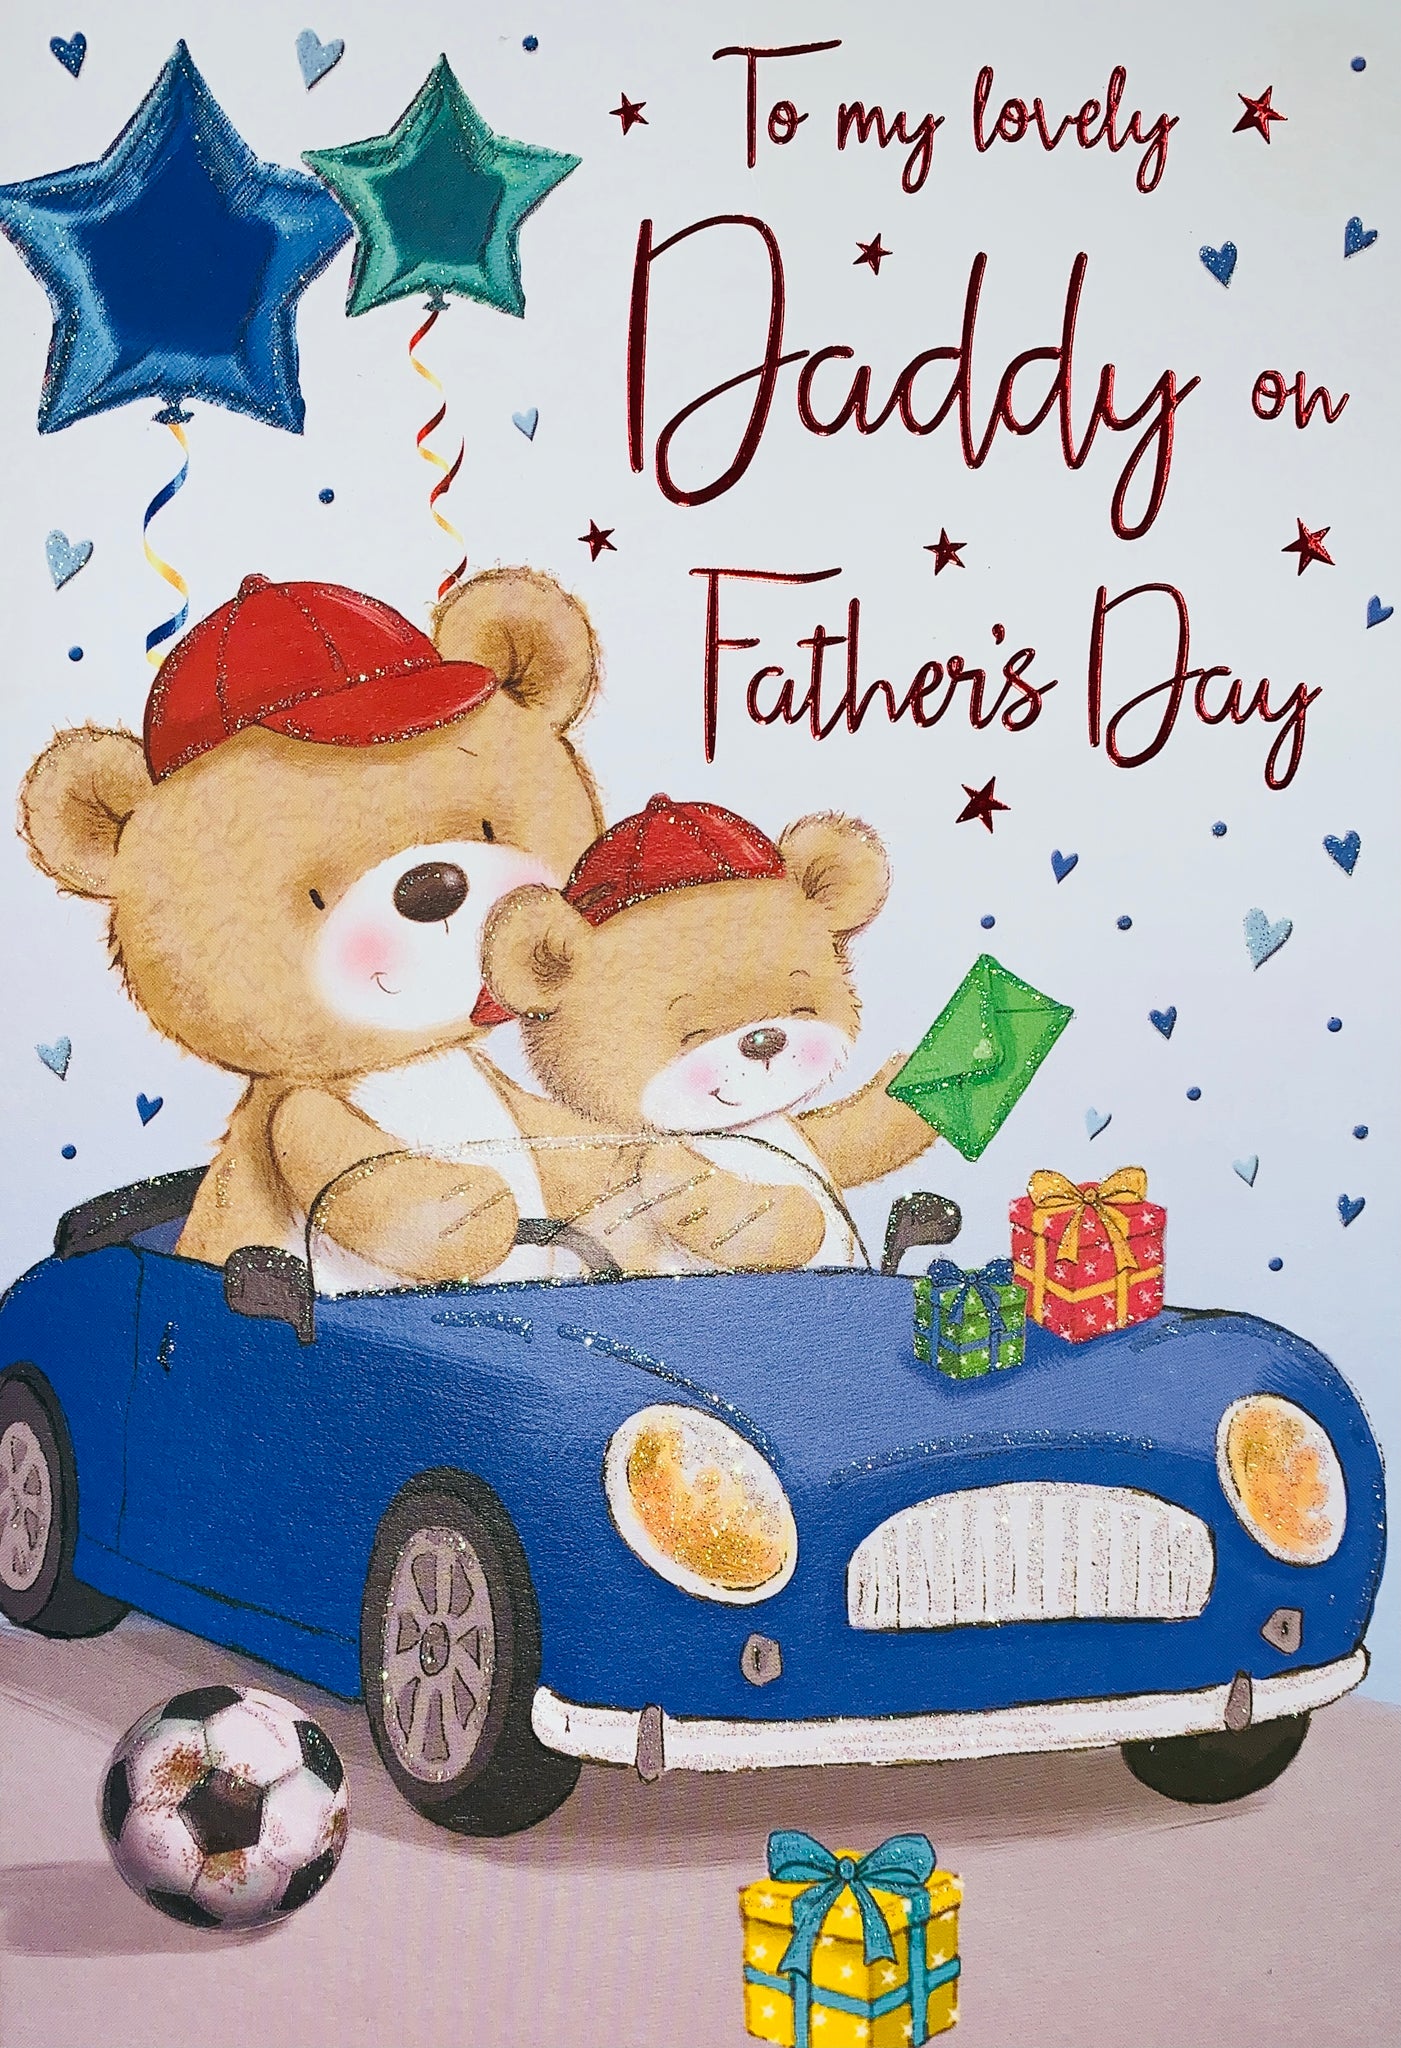 Daddy Father’s Day card cute bears in blue car